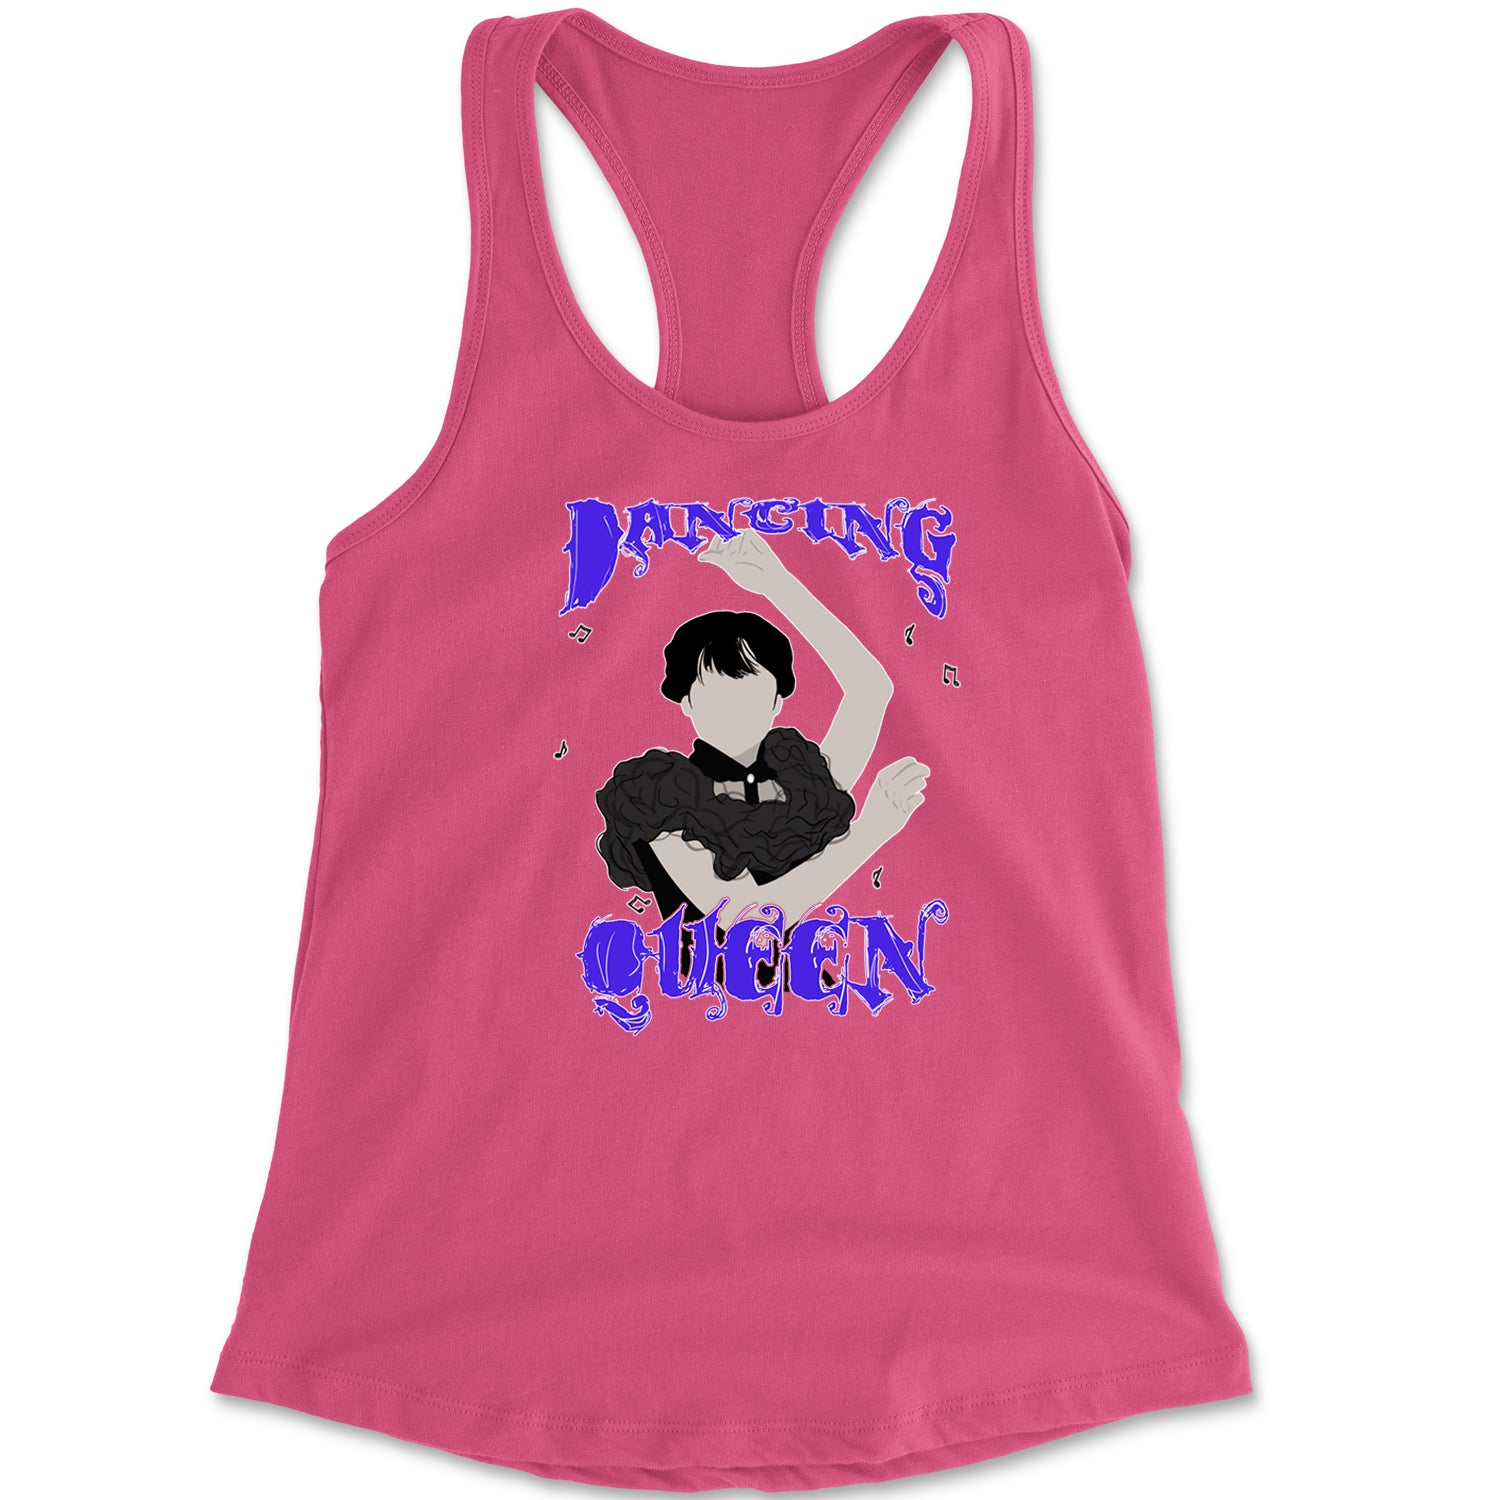 Wednesday Dancing Queen Racerback Tank Top for Women black, On, we, wear, wednesdays by Expression Tees